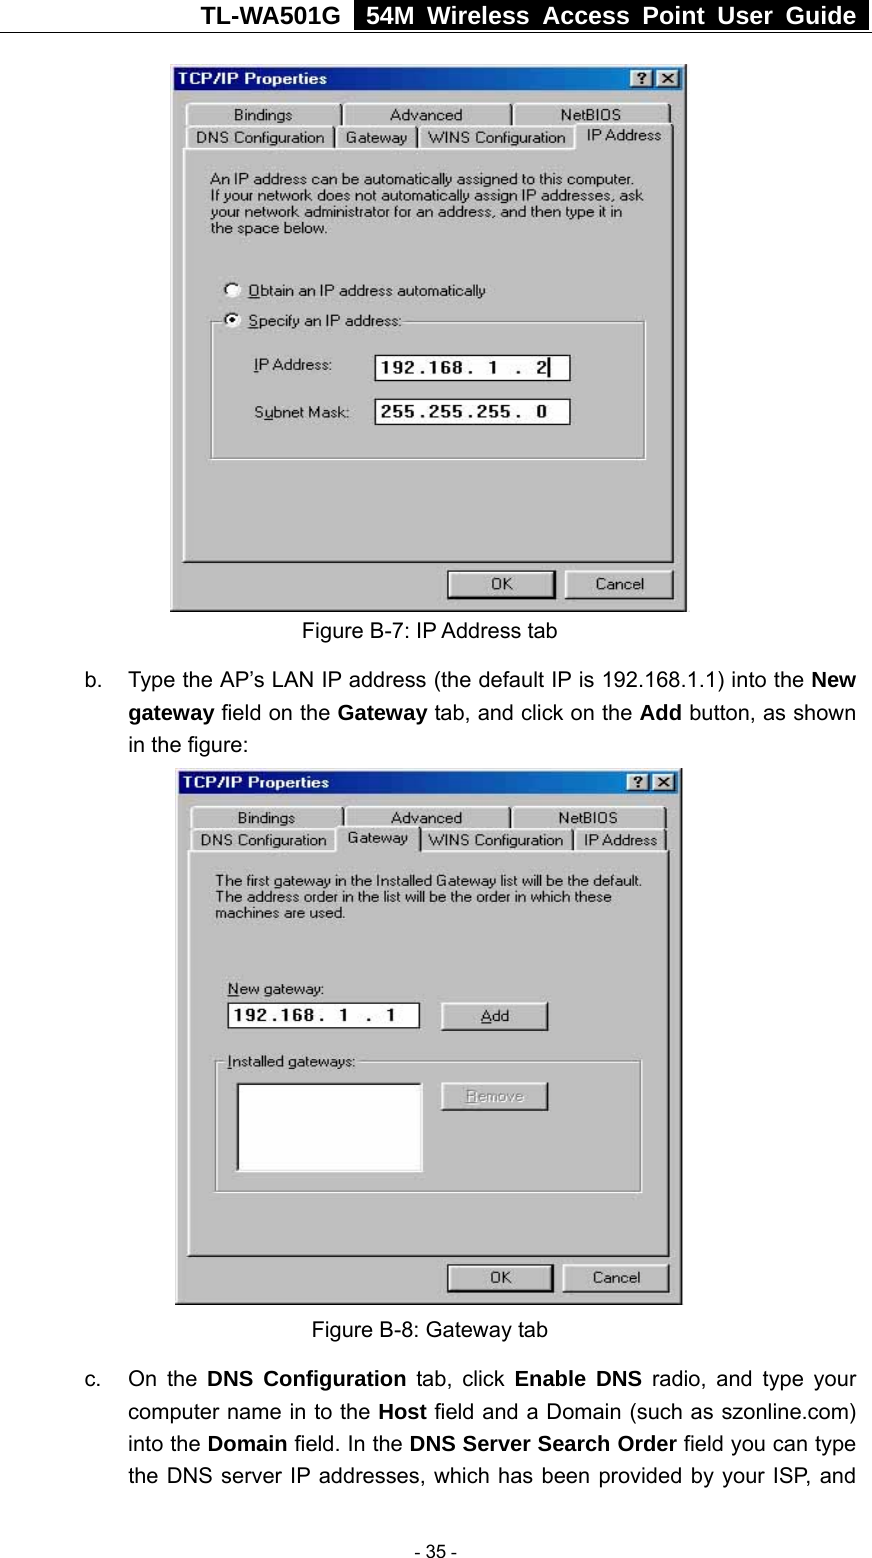 TL-WA501G   54M Wireless Access Point User Guide   Figure B-7: IP Address tab b.  Type the AP’s LAN IP address (the default IP is 192.168.1.1) into the New gateway field on the Gateway tab, and click on the Add button, as shown in the figure:    Figure B-8: Gateway tab c. On the DNS Configuration tab, click Enable DNS radio, and type your computer name in to the Host field and a Domain (such as szonline.com) into the Domain field. In the DNS Server Search Order field you can type the DNS server IP addresses, which has been provided by your ISP, and  - 35 - 